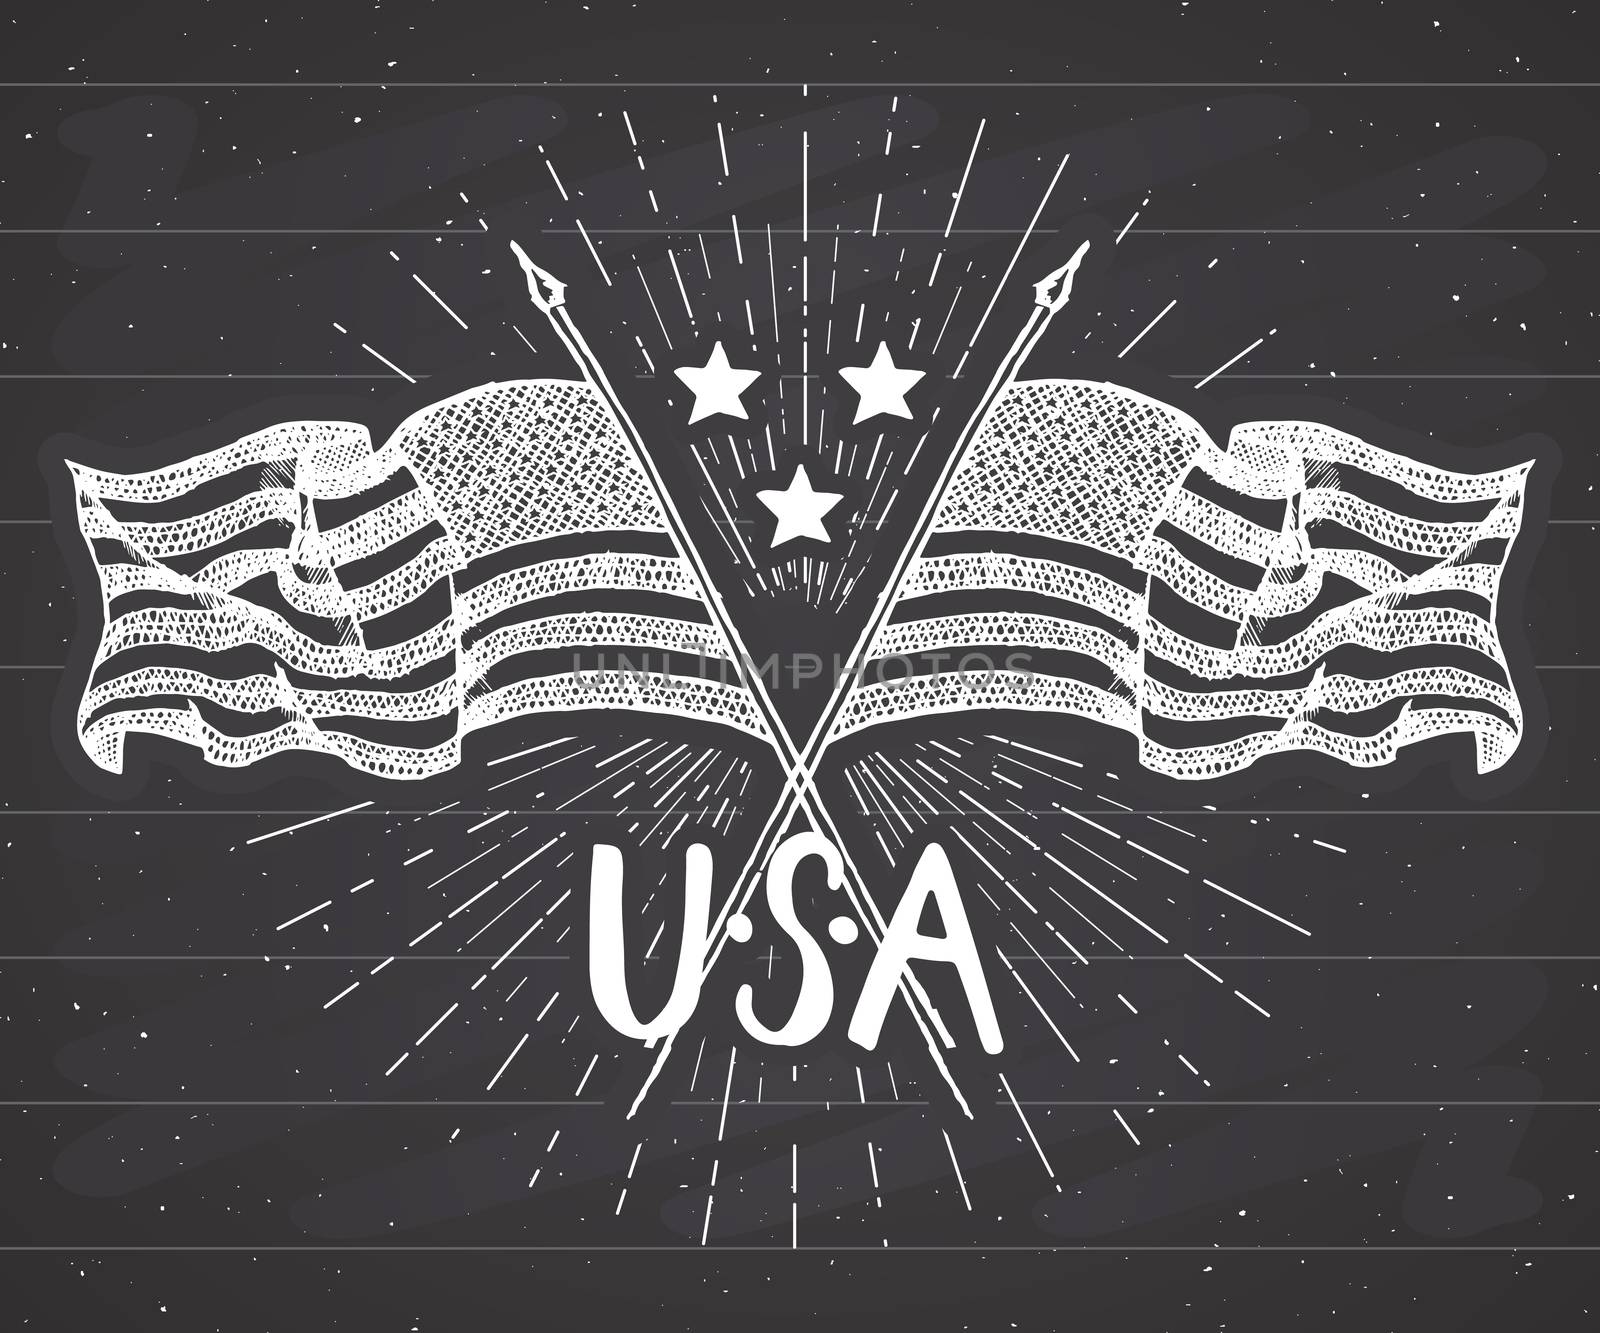 Vintage label, Hand drawn crossed USA flags, Happy Independence Day, fourth of july celebration, greeting card, grunge textured retro badge, typography design vector illustration on chalkboard